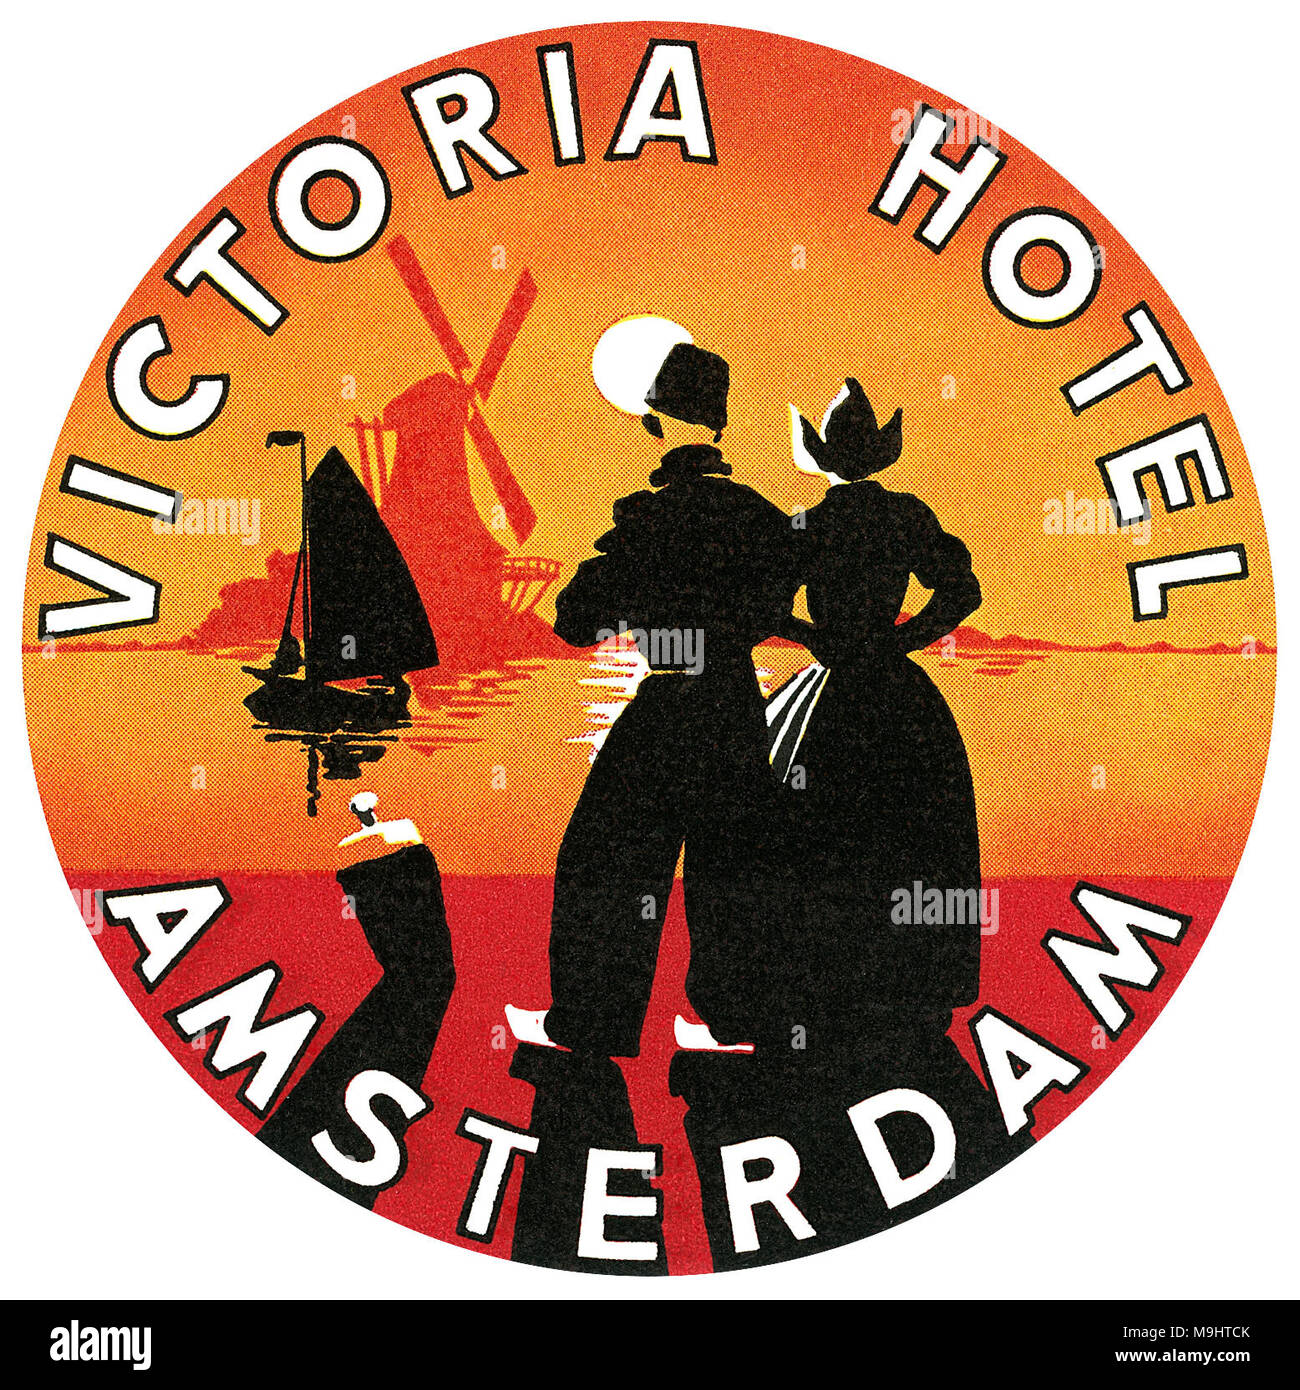 Vintage luggage label for the Victoria Hotel in Amsterdam, The Netherlands. Stock Photo